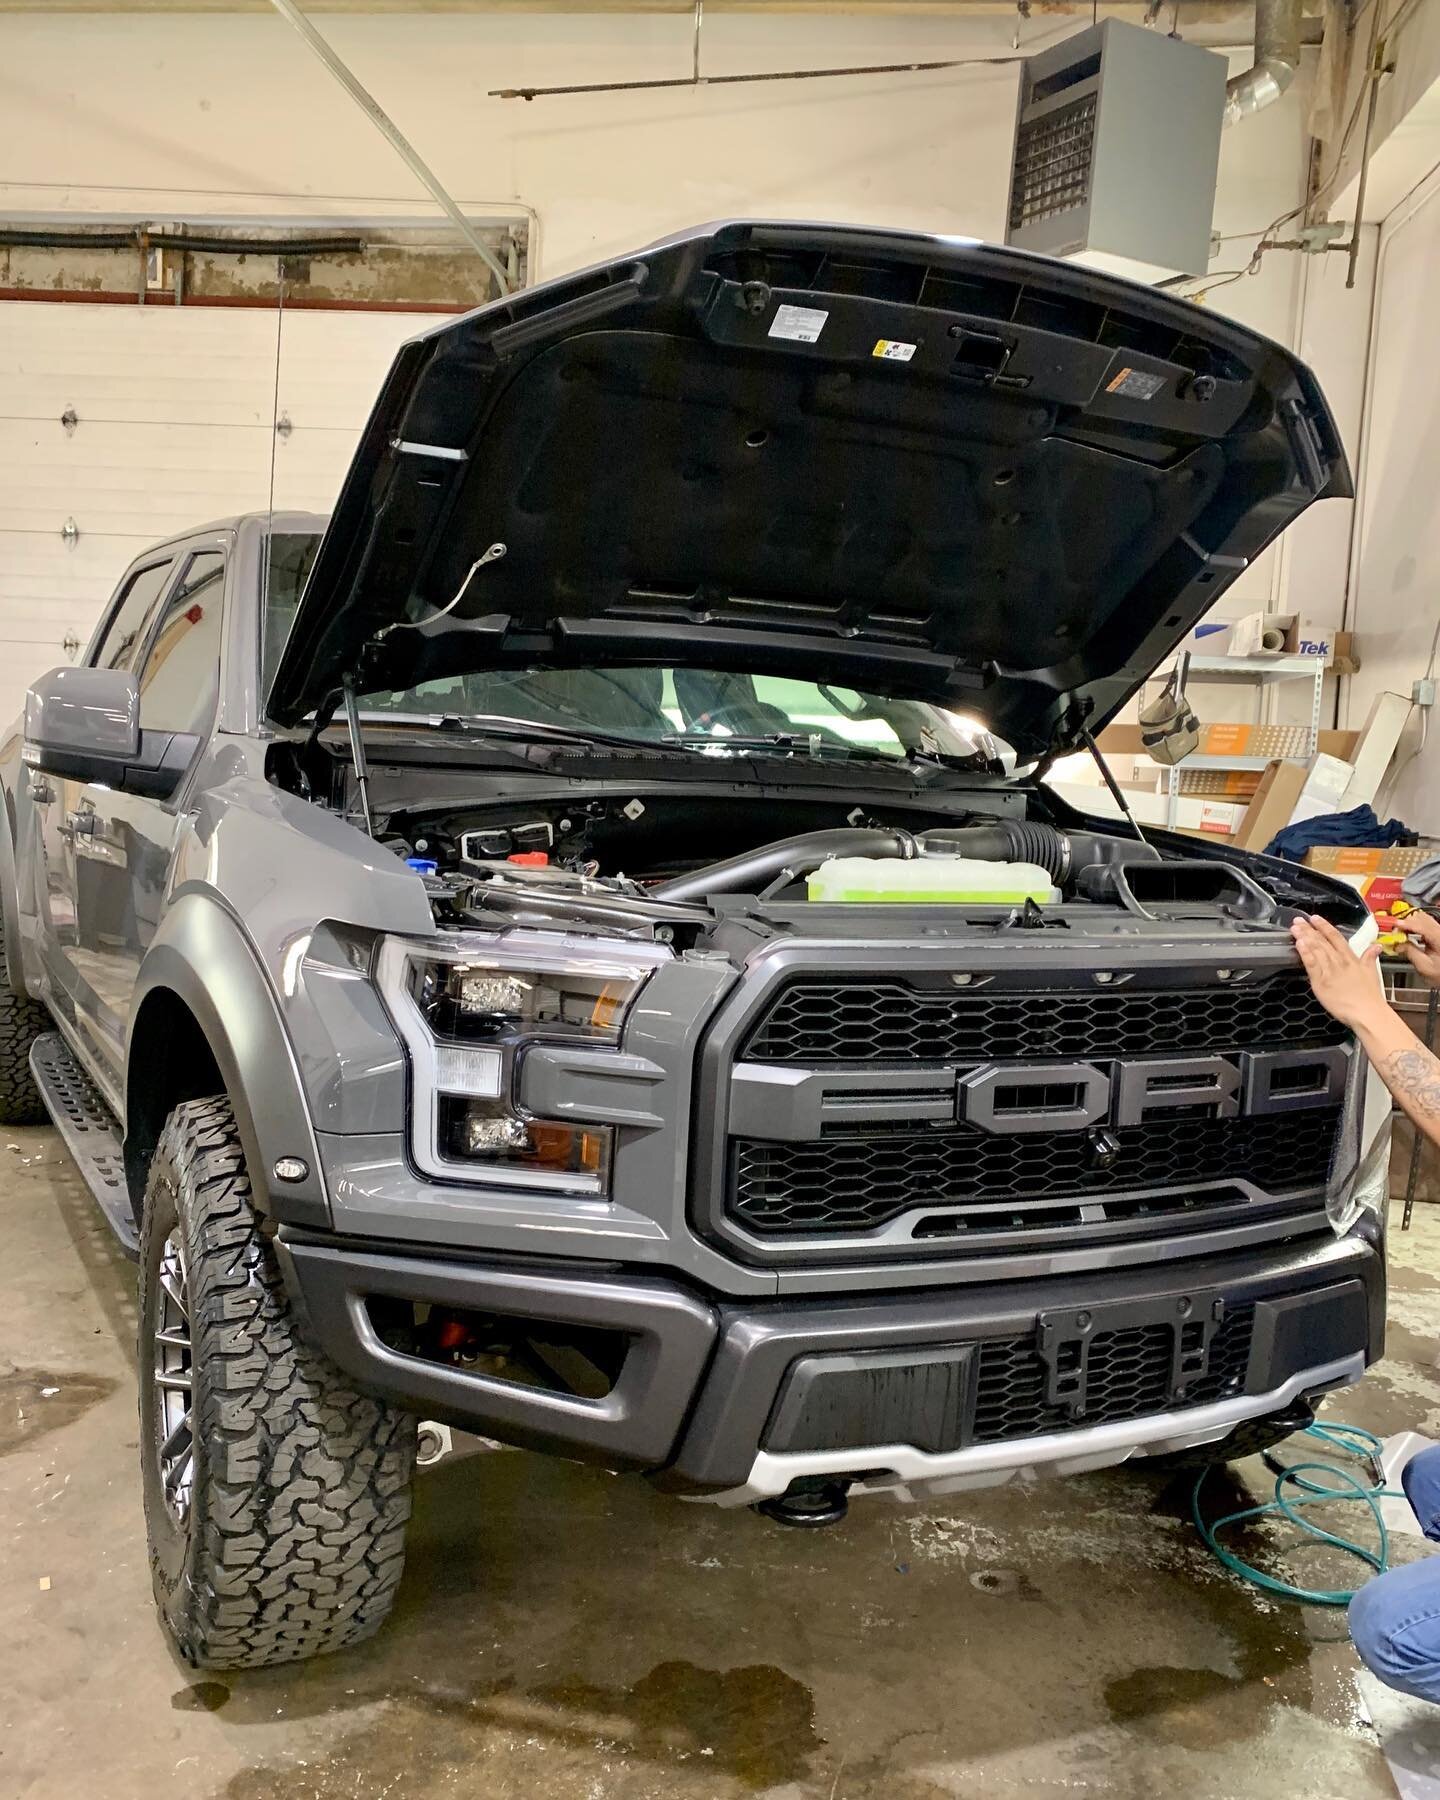 Big trucks means big projects. Full front end covered with ClearBra while also covering mirrors, door cups, and door jams! #Clearbra #Clear #Boulder #Colorado #ClearChoice #PPF #Ford #Truck #FullFrontEndProtection #Detail